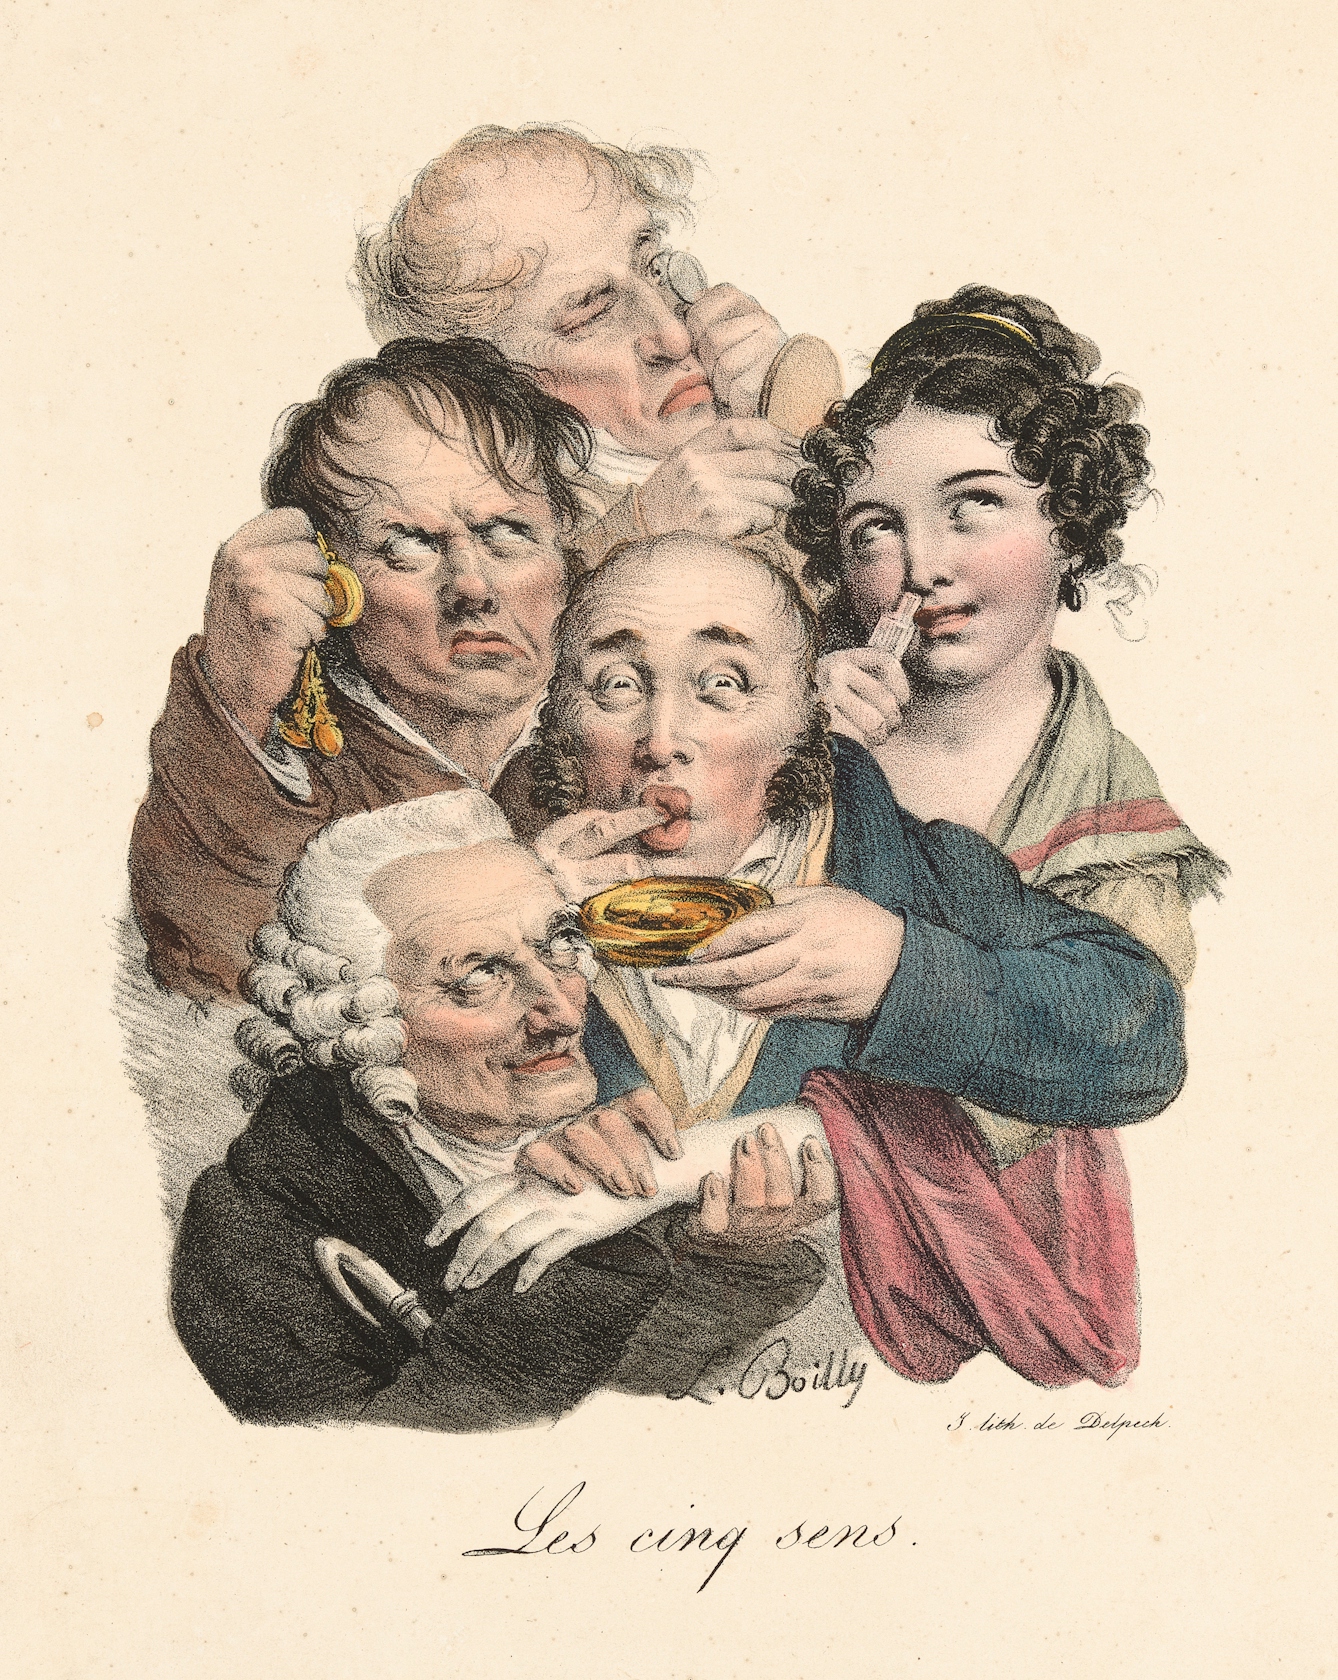 Image of four men and a woman experiencing making strange faces.